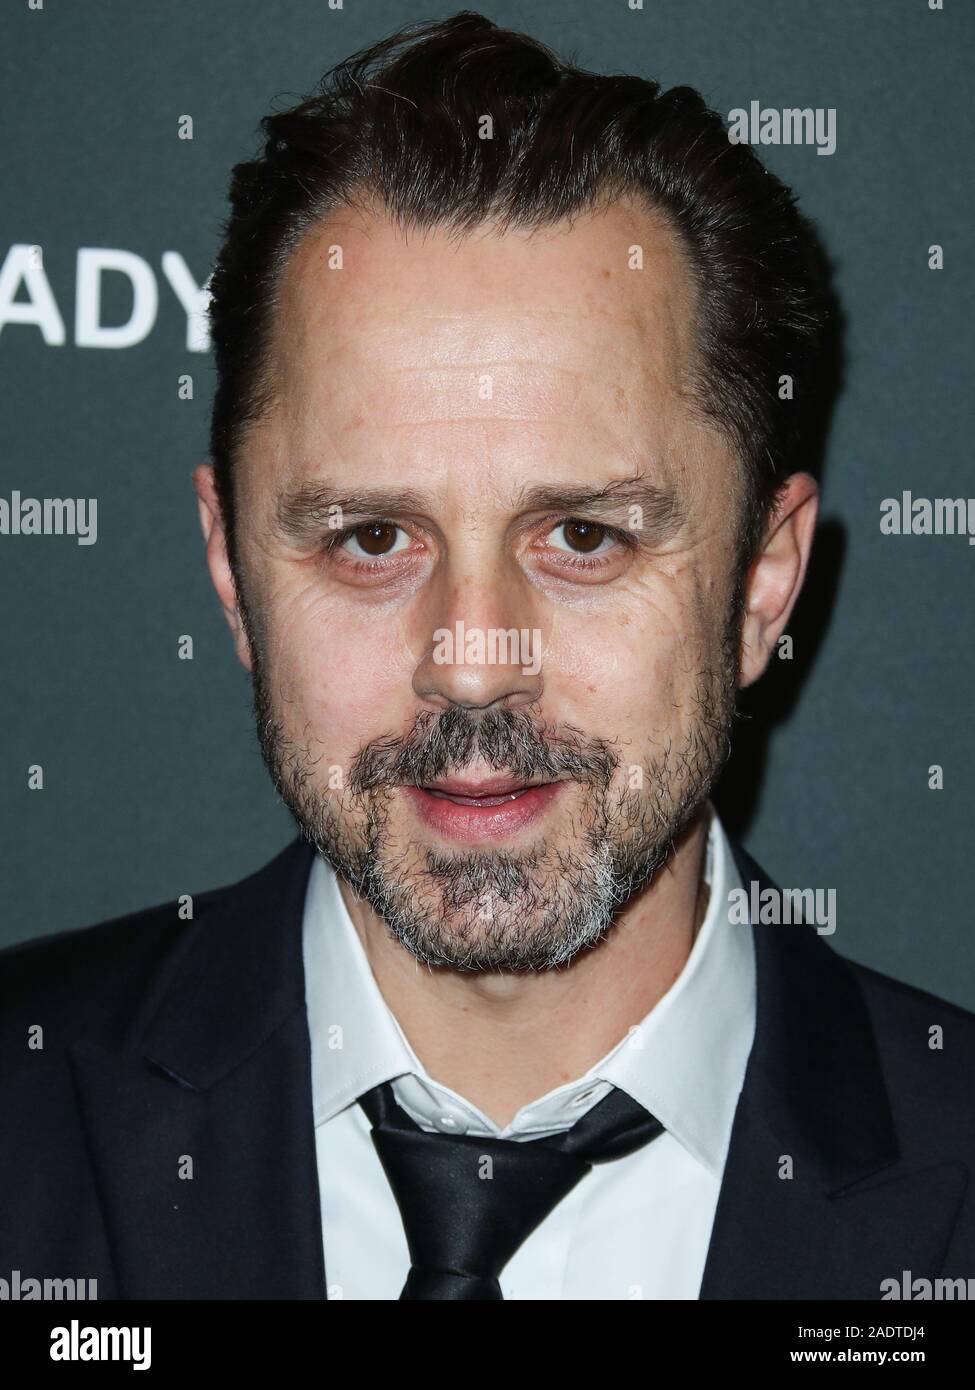 West Hollywood, United States. 04th Dec, 2019. WEST HOLLYWOOD, LOS ANGELES, CALIFORNIA, USA - DECEMBER 04: Actor Giovanni Ribisi arrives at the Los Angeles Special Screening Of Momentum Pictures' 'A Million Little Pieces' held at The London Hotel West Hollywood at Beverly Hills on December 4, 2019 in West Hollywood, Los Angeles, California, United States. (Photo by Xavier Collin/Image Press Agency) Credit: Image Press Agency/Alamy Live News Stock Photo